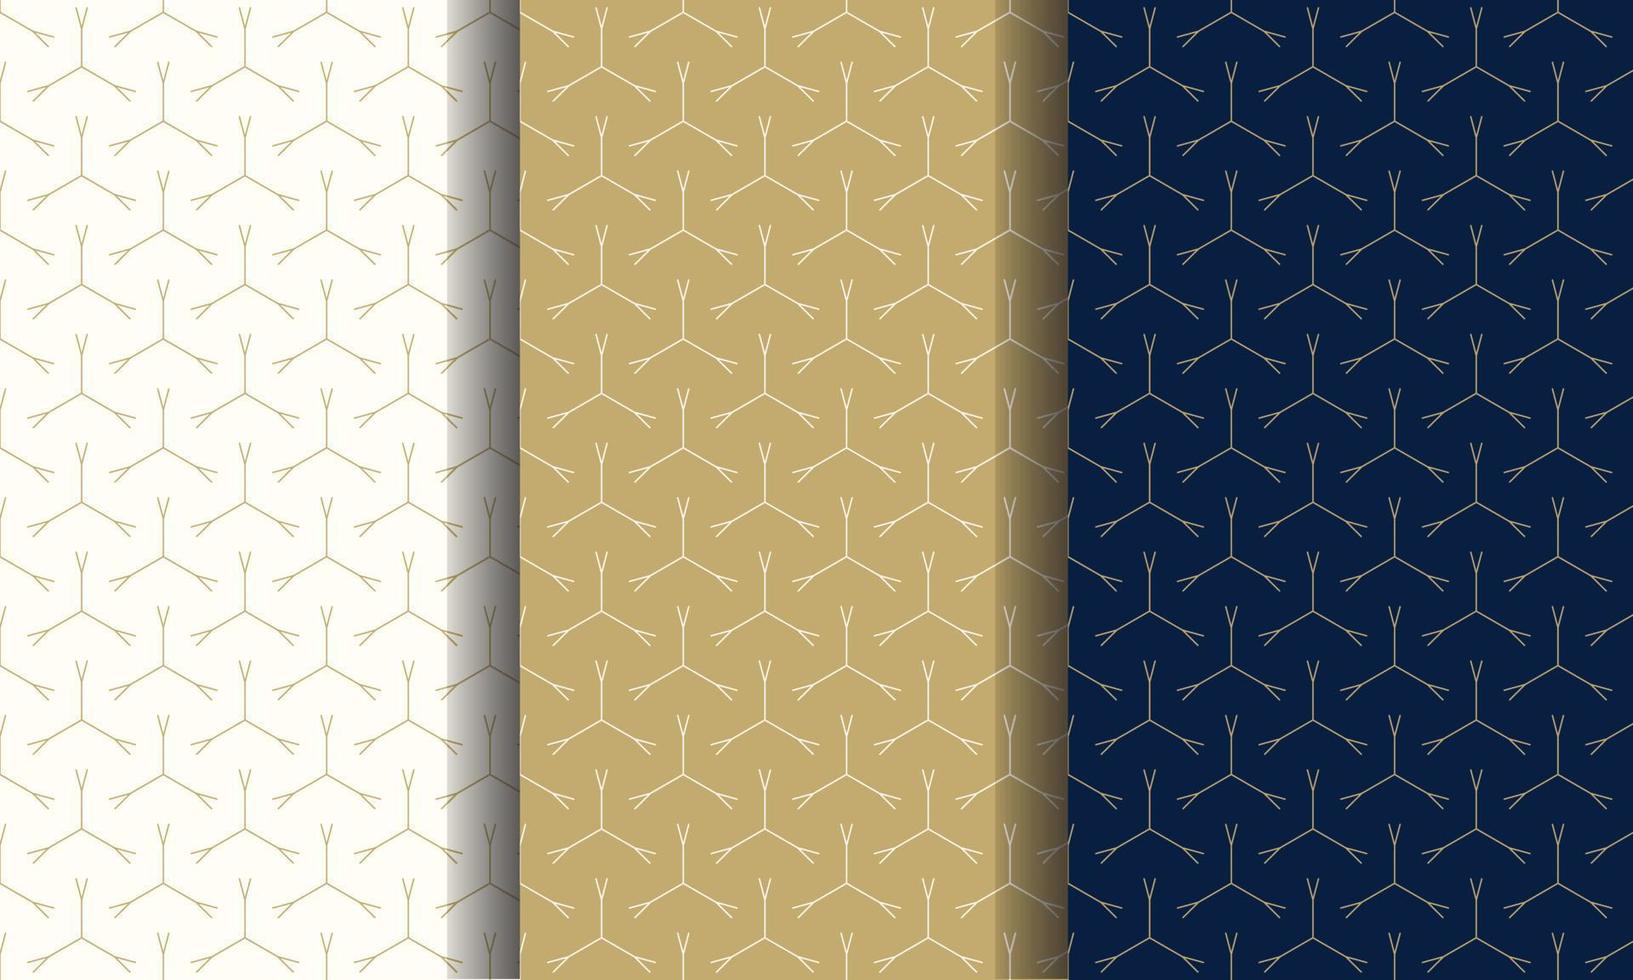 https://static.vecteezy.com/system/resources/previews/011/914/153/non_2x/luxury-pattern-seamless-background-for-premium-brand-illustration-vector.jpg